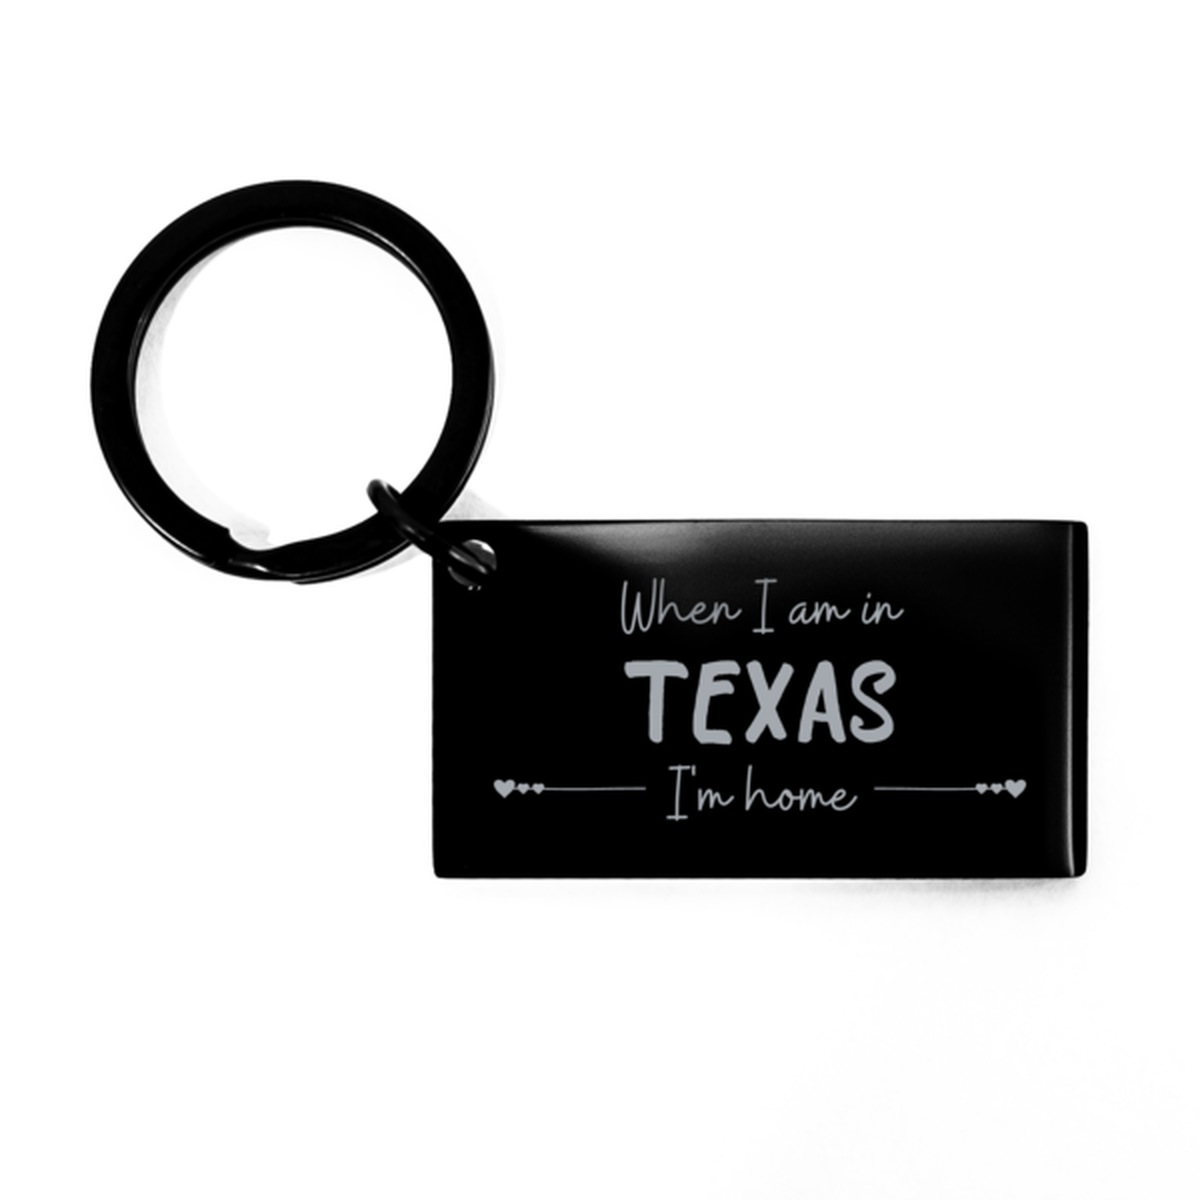 When I am in Texas I'm home Keychain, Cheap Gifts For Texas, State Texas Birthday Gifts for Friends Coworker